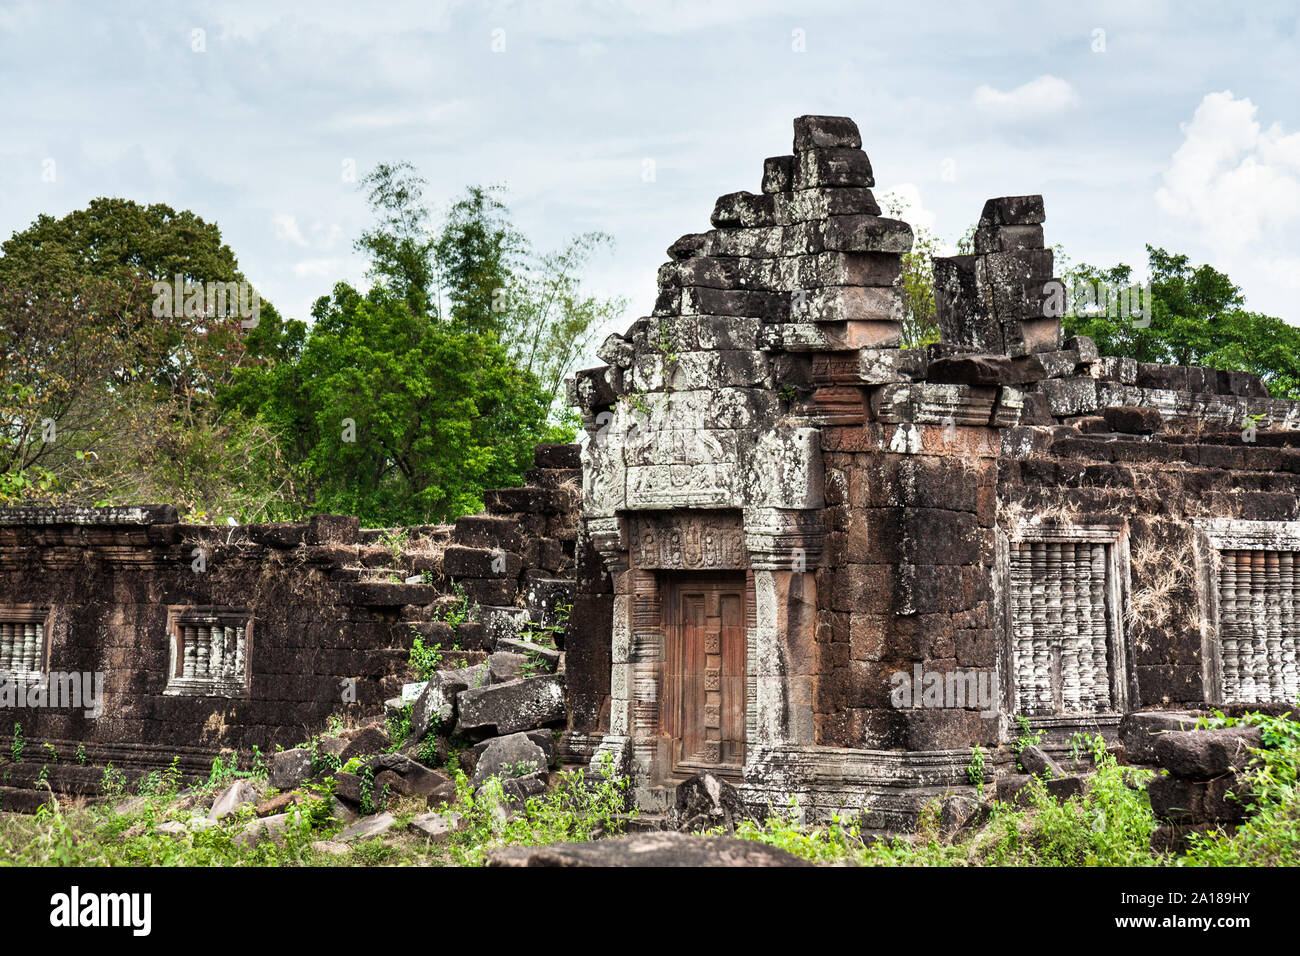 North Palace ruins in Wat Phu (Vat Phou), a pre-Angkor Khmer Hindu and Buddhist temple in Champasak Province, near Pakse, Lao PDR. Stock Photo